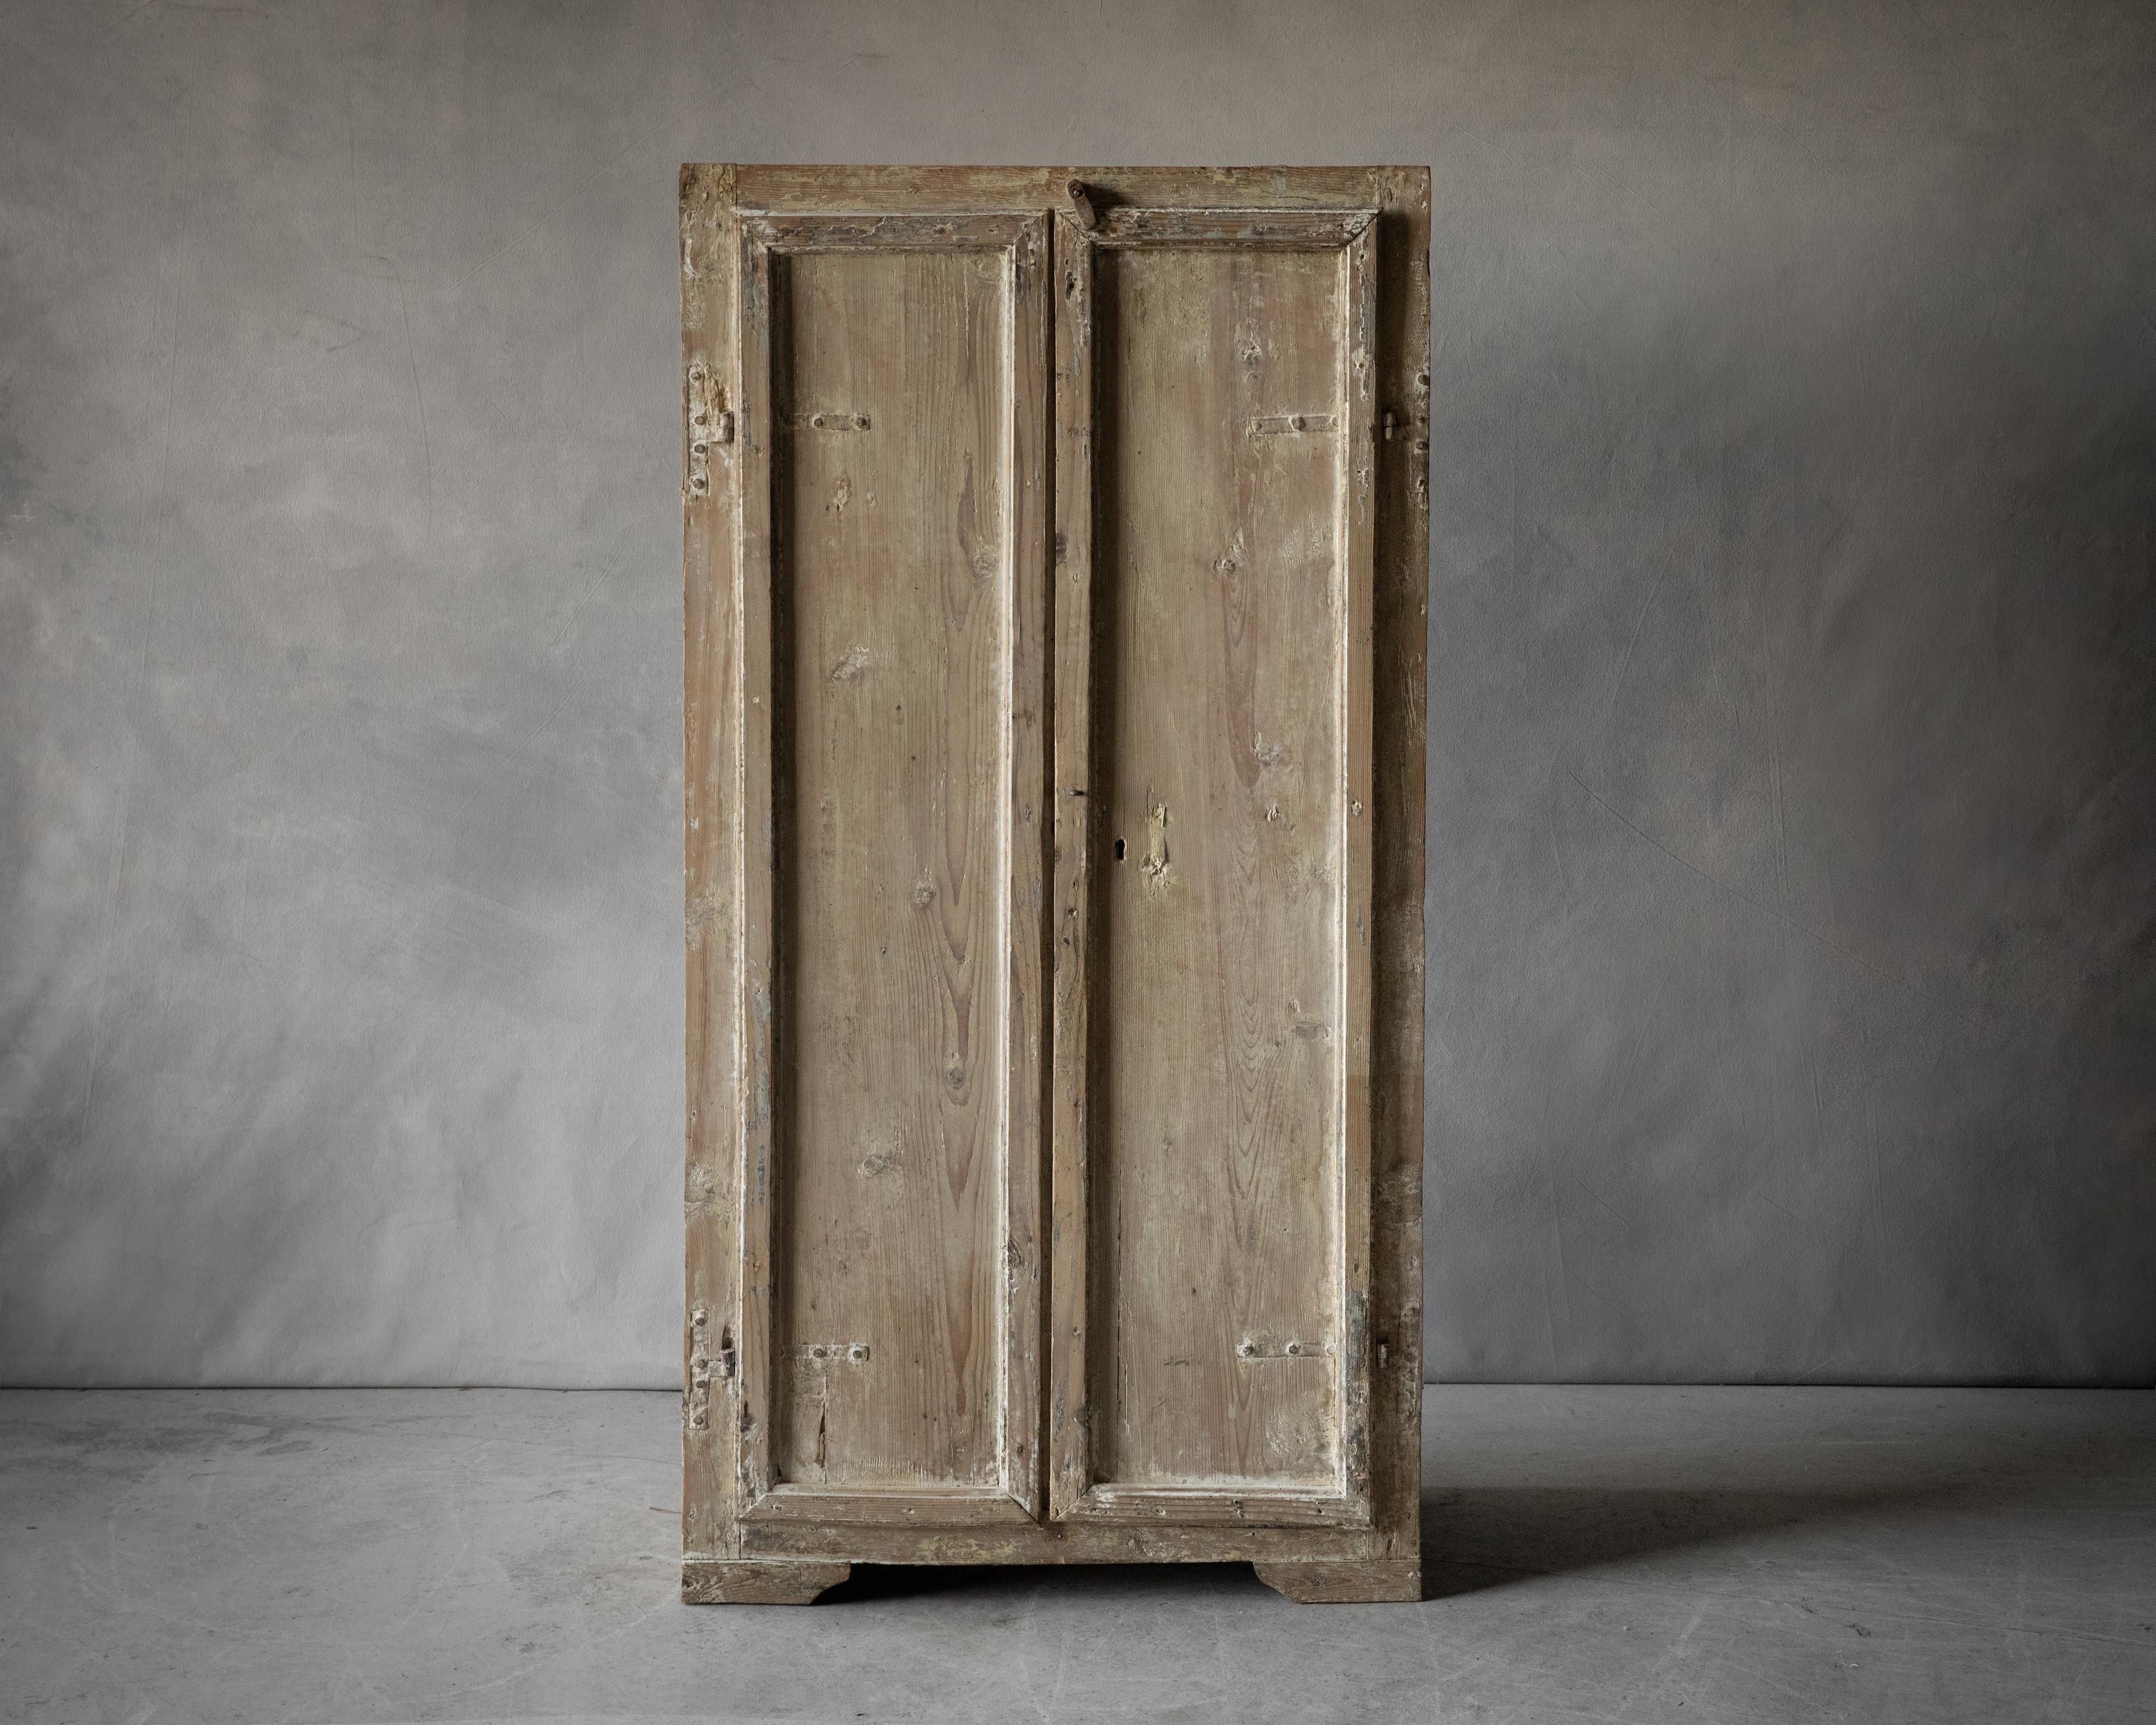 Early Two Door Cabinet From Italy, circa 1800. Solid pine construction with fantastic original paint and hardware.